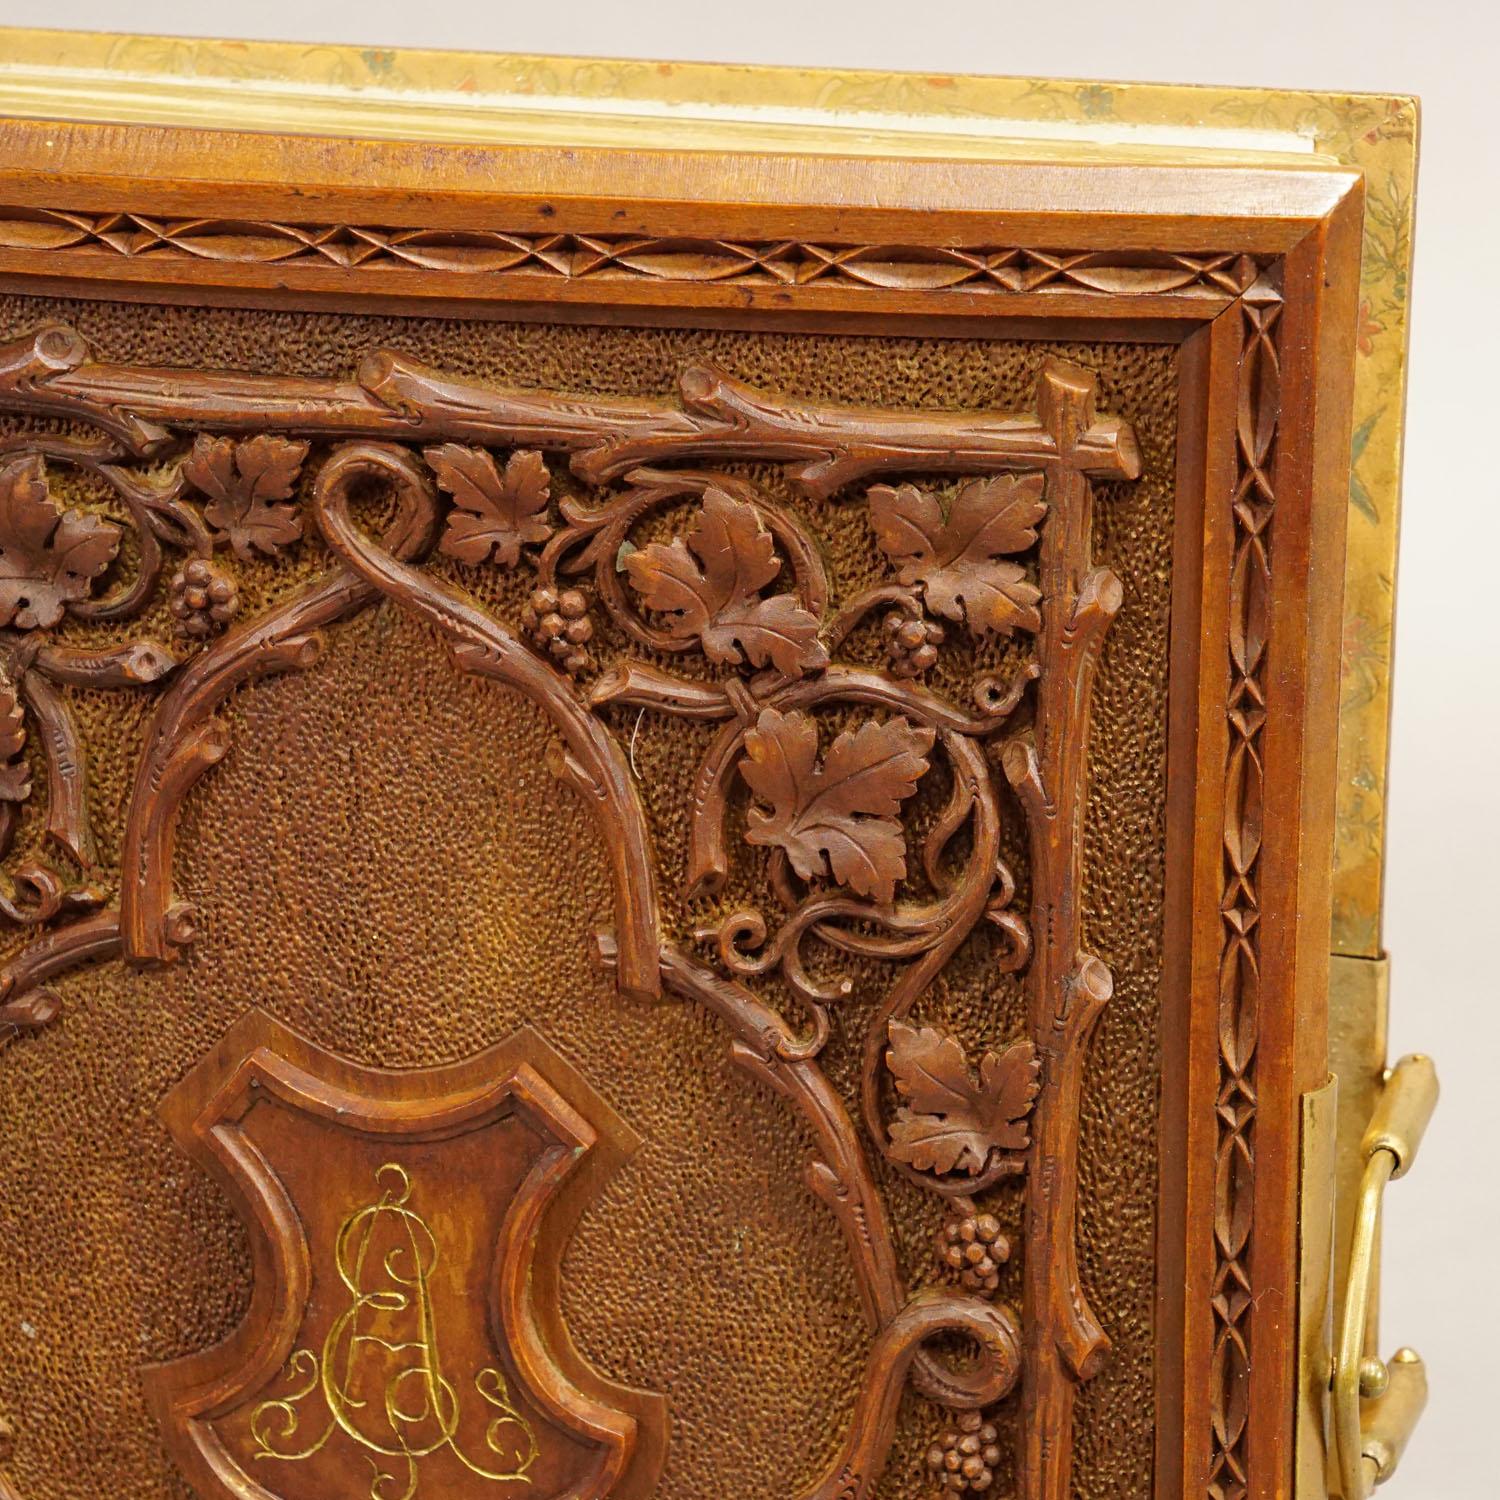 Black Forest Antique Photo Album with Wooden Carved Cover, Brienz ca. 1900 For Sale